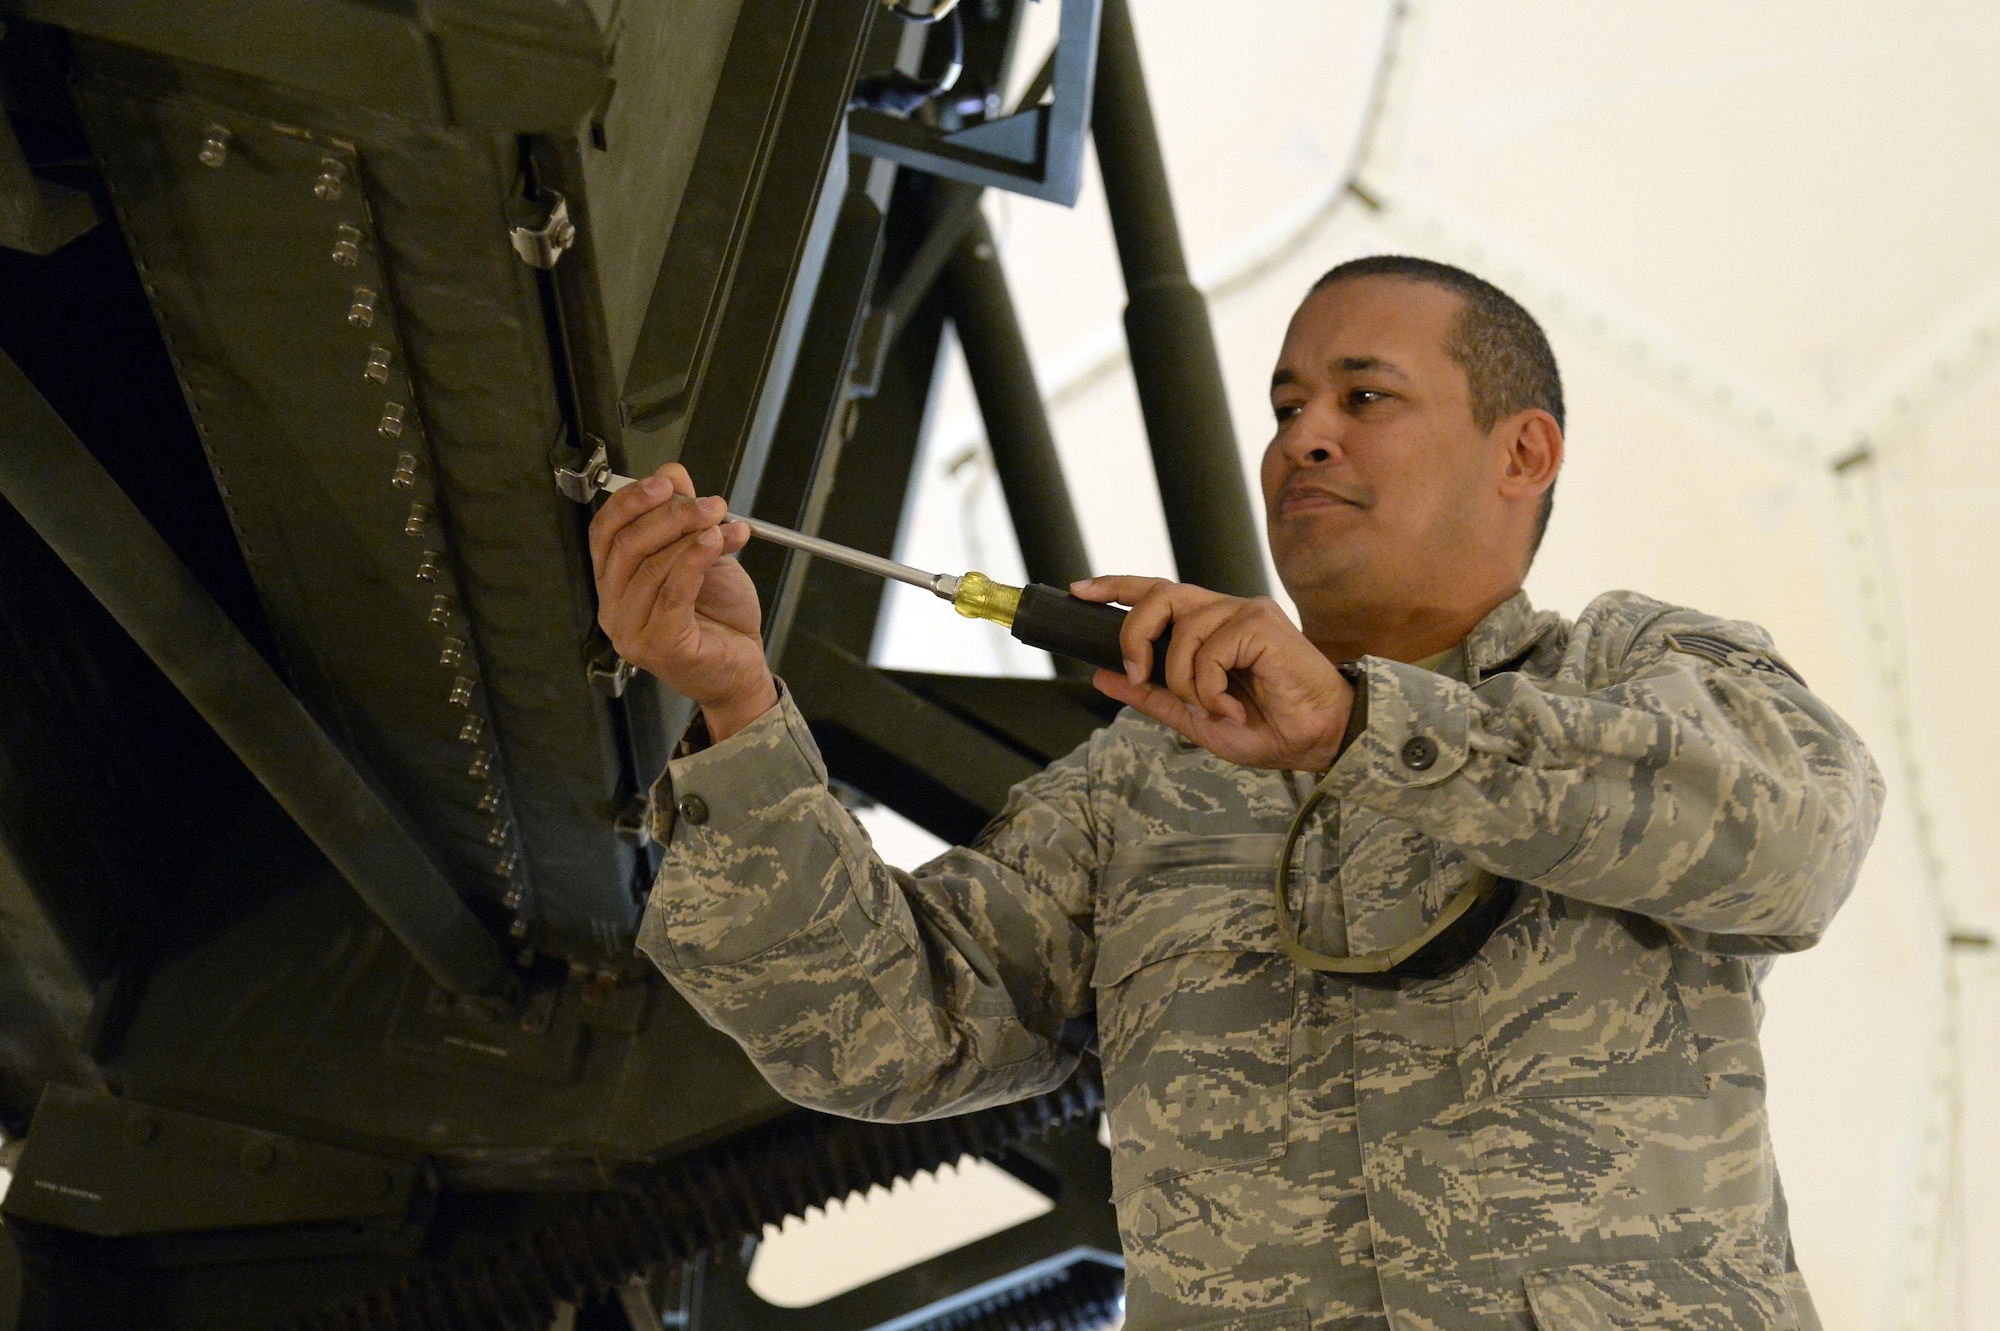 Staff Sgt. Pedro, radar maintenance technician, prepares a TPS-75 radar antenna for a performance maintenance inspection at an undisclosed location in Southwest Asia March 24, 2015. Airmen with the Expeditionary Air Control Squadron radar maintenance perform daily maintenance to ensure the radars are operational. Pedro is currently deployed from the Air National Guard’s 141st Air Control Squadron out of Ramey Air Force Base, Puerto Rico. (U.S. Air Force photo/Tech. Sgt. Brown/RELEASED)